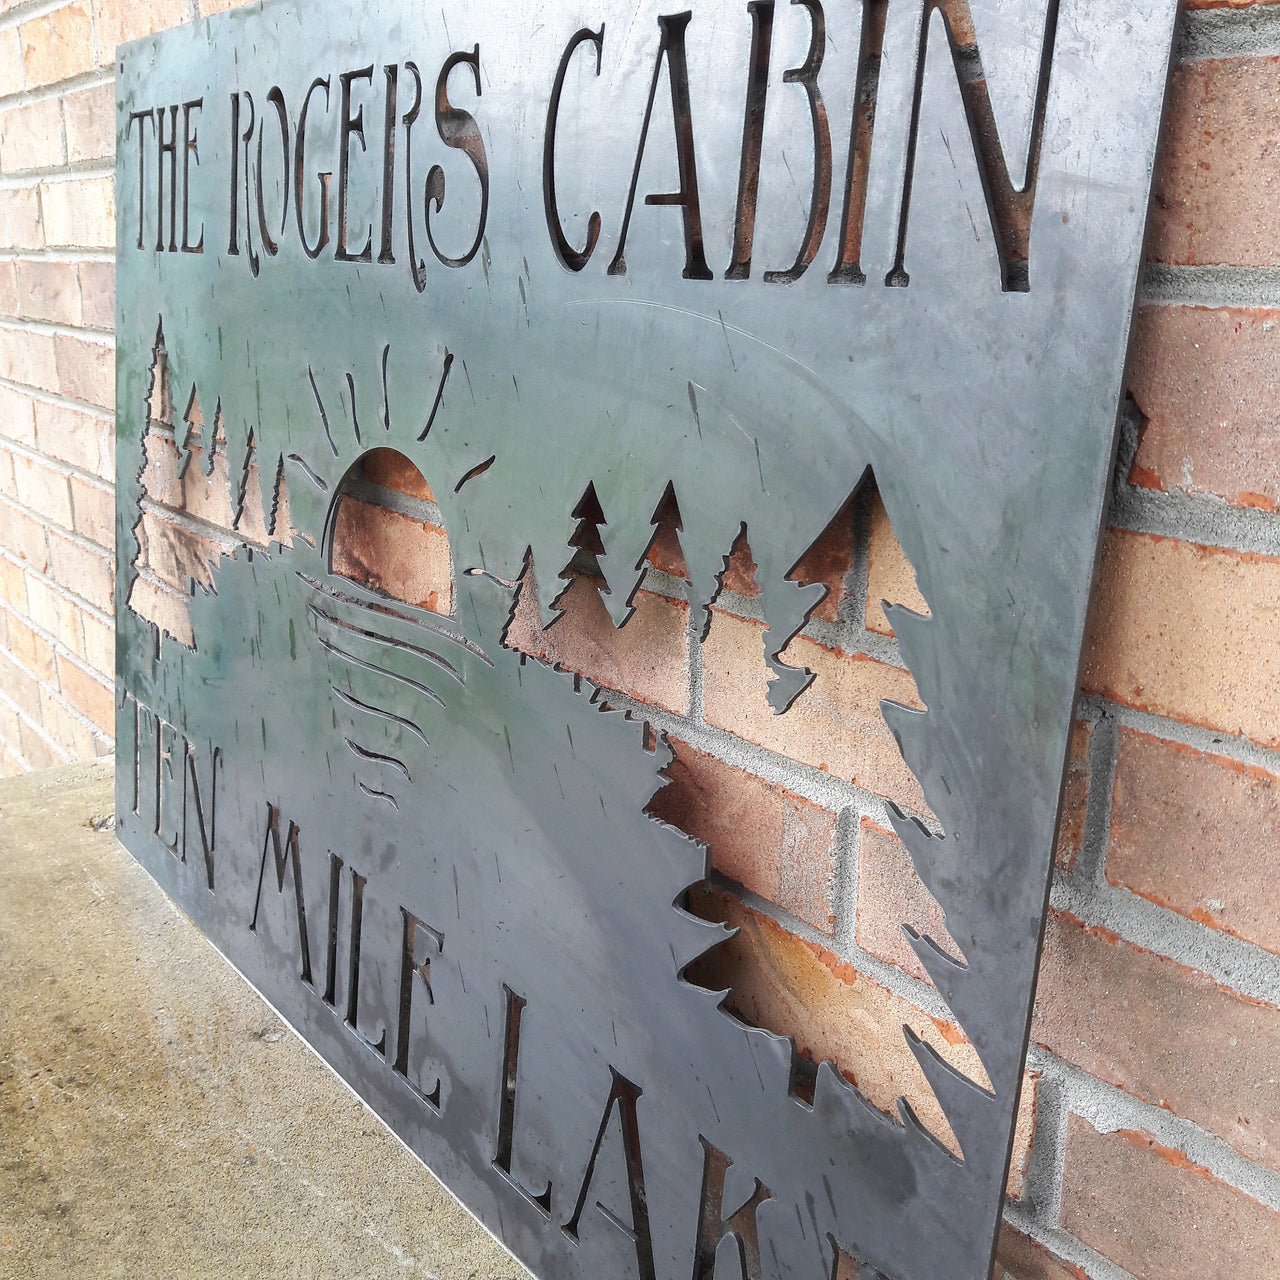 This metal sign has a tree line with a setting sun and reads, "The Rogers Cabin Ten Mile Lake"